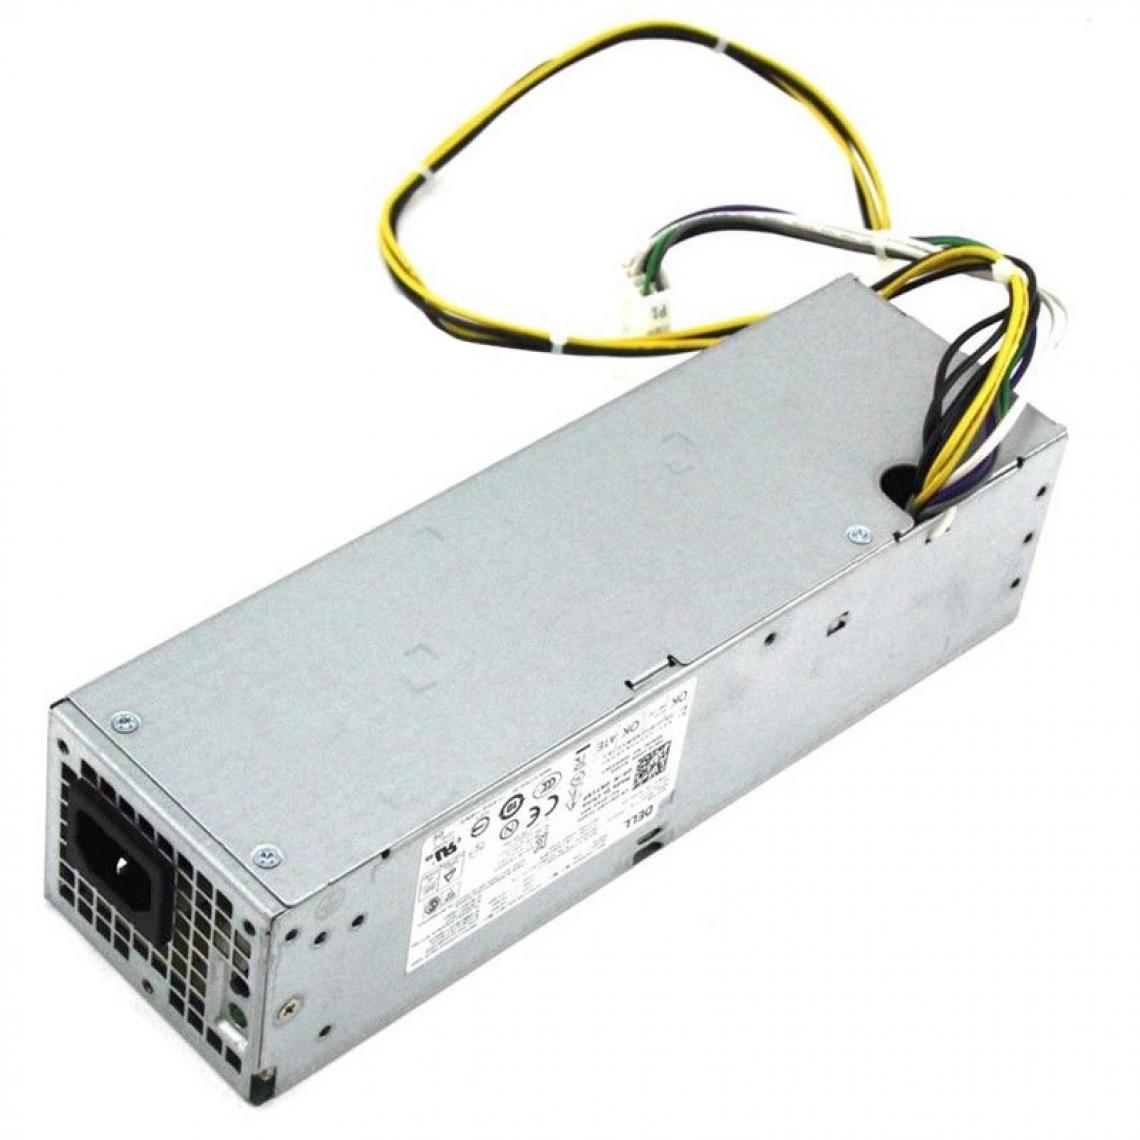 Dell - Alimentation DELL Optiplex 7020 SFF L255AS-00 PS-3261-2DF 0NT1XP 255W Power Supply - Alimentation modulaire